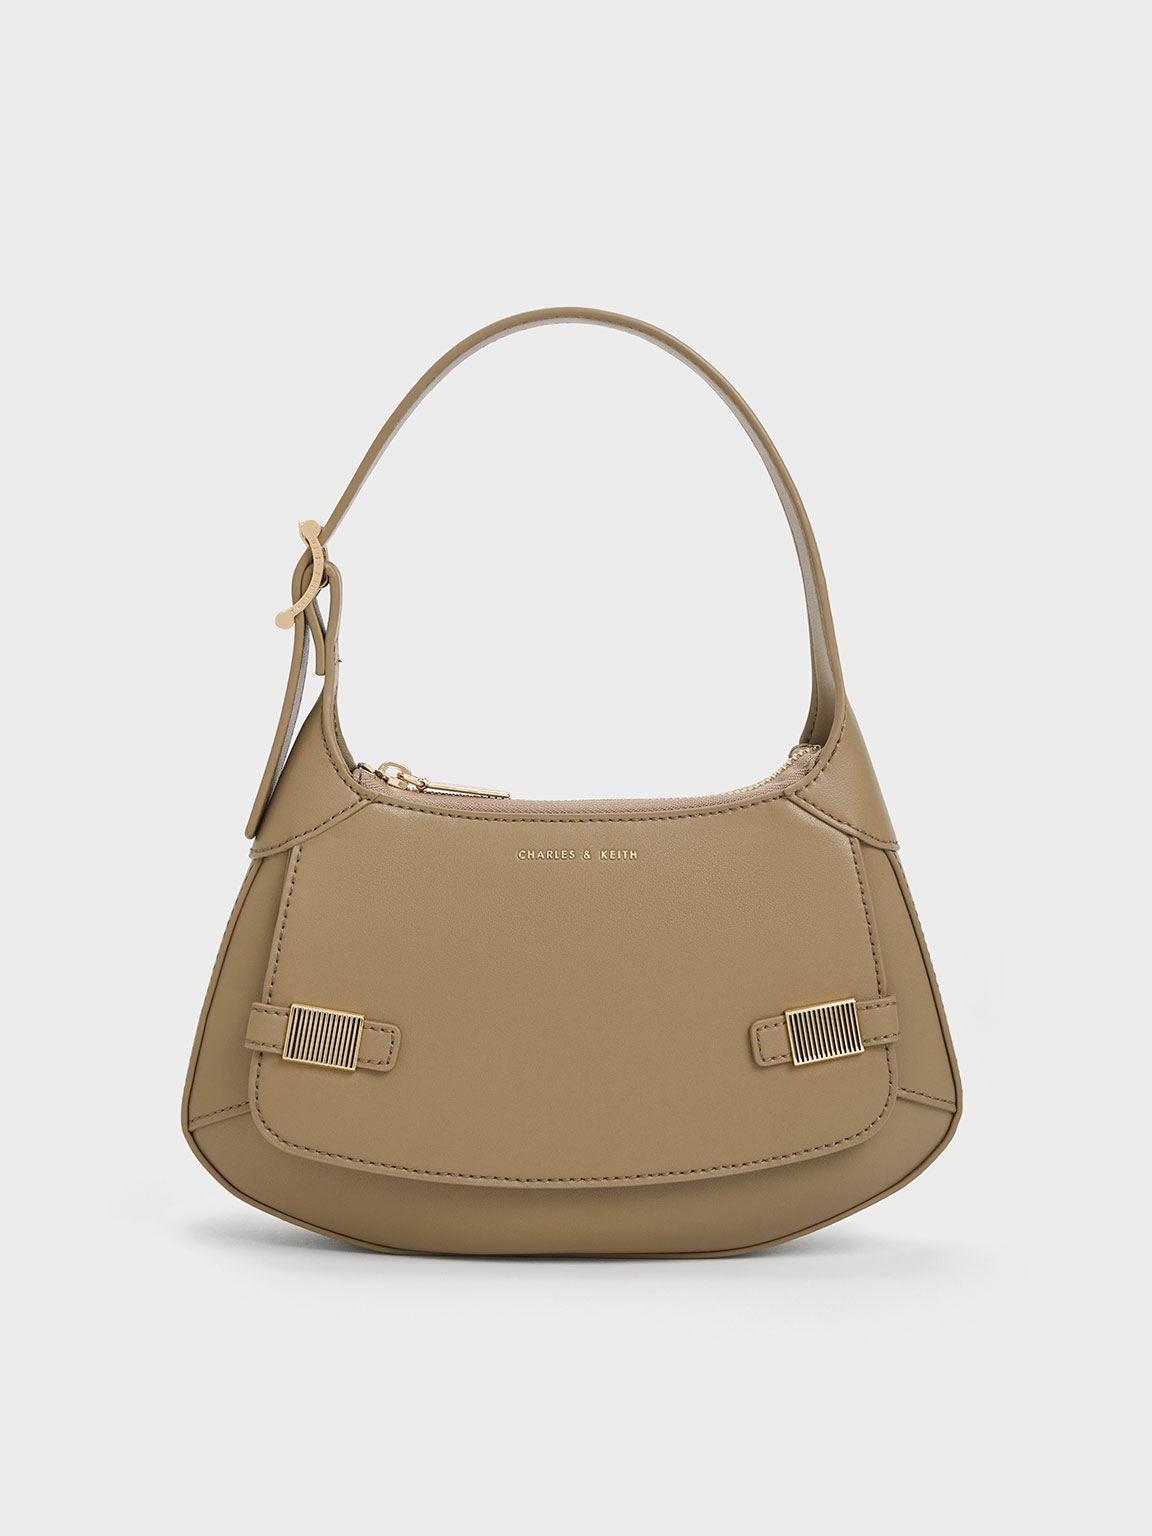 Charles & Keith - Women's Metallic-Accent Curved Shoulder Bag, Taupe, M